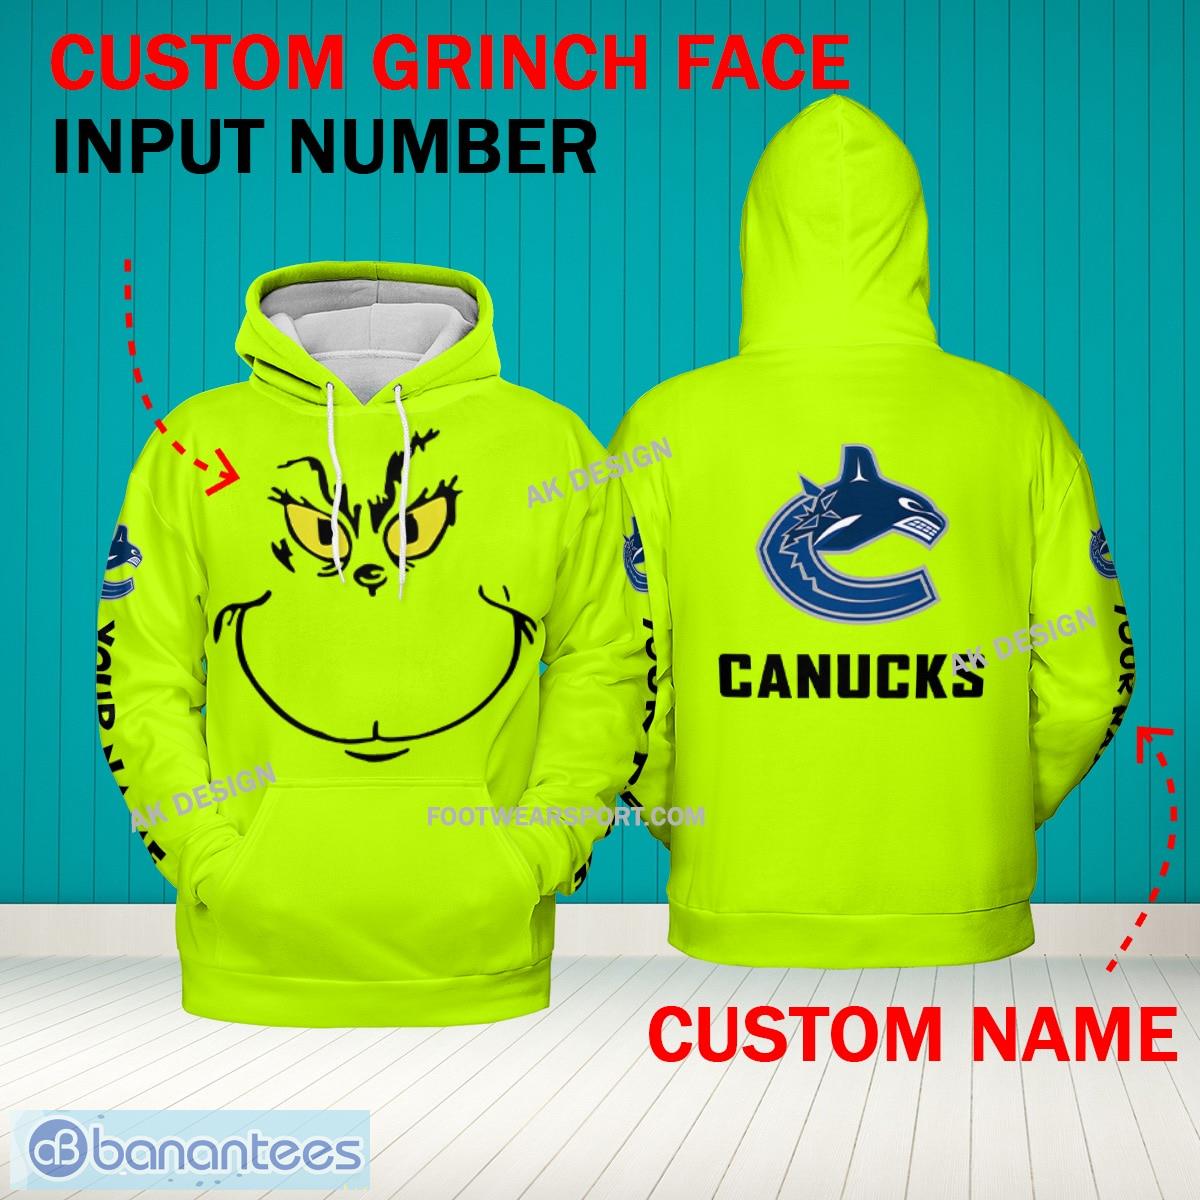 Grinch Face Vancouver Canucks 3D Hoodie, Zip Hoodie, Sweater Green AOP Custom Number And Name - Grinch Face NHL Vancouver Canucks 3D Hoodie